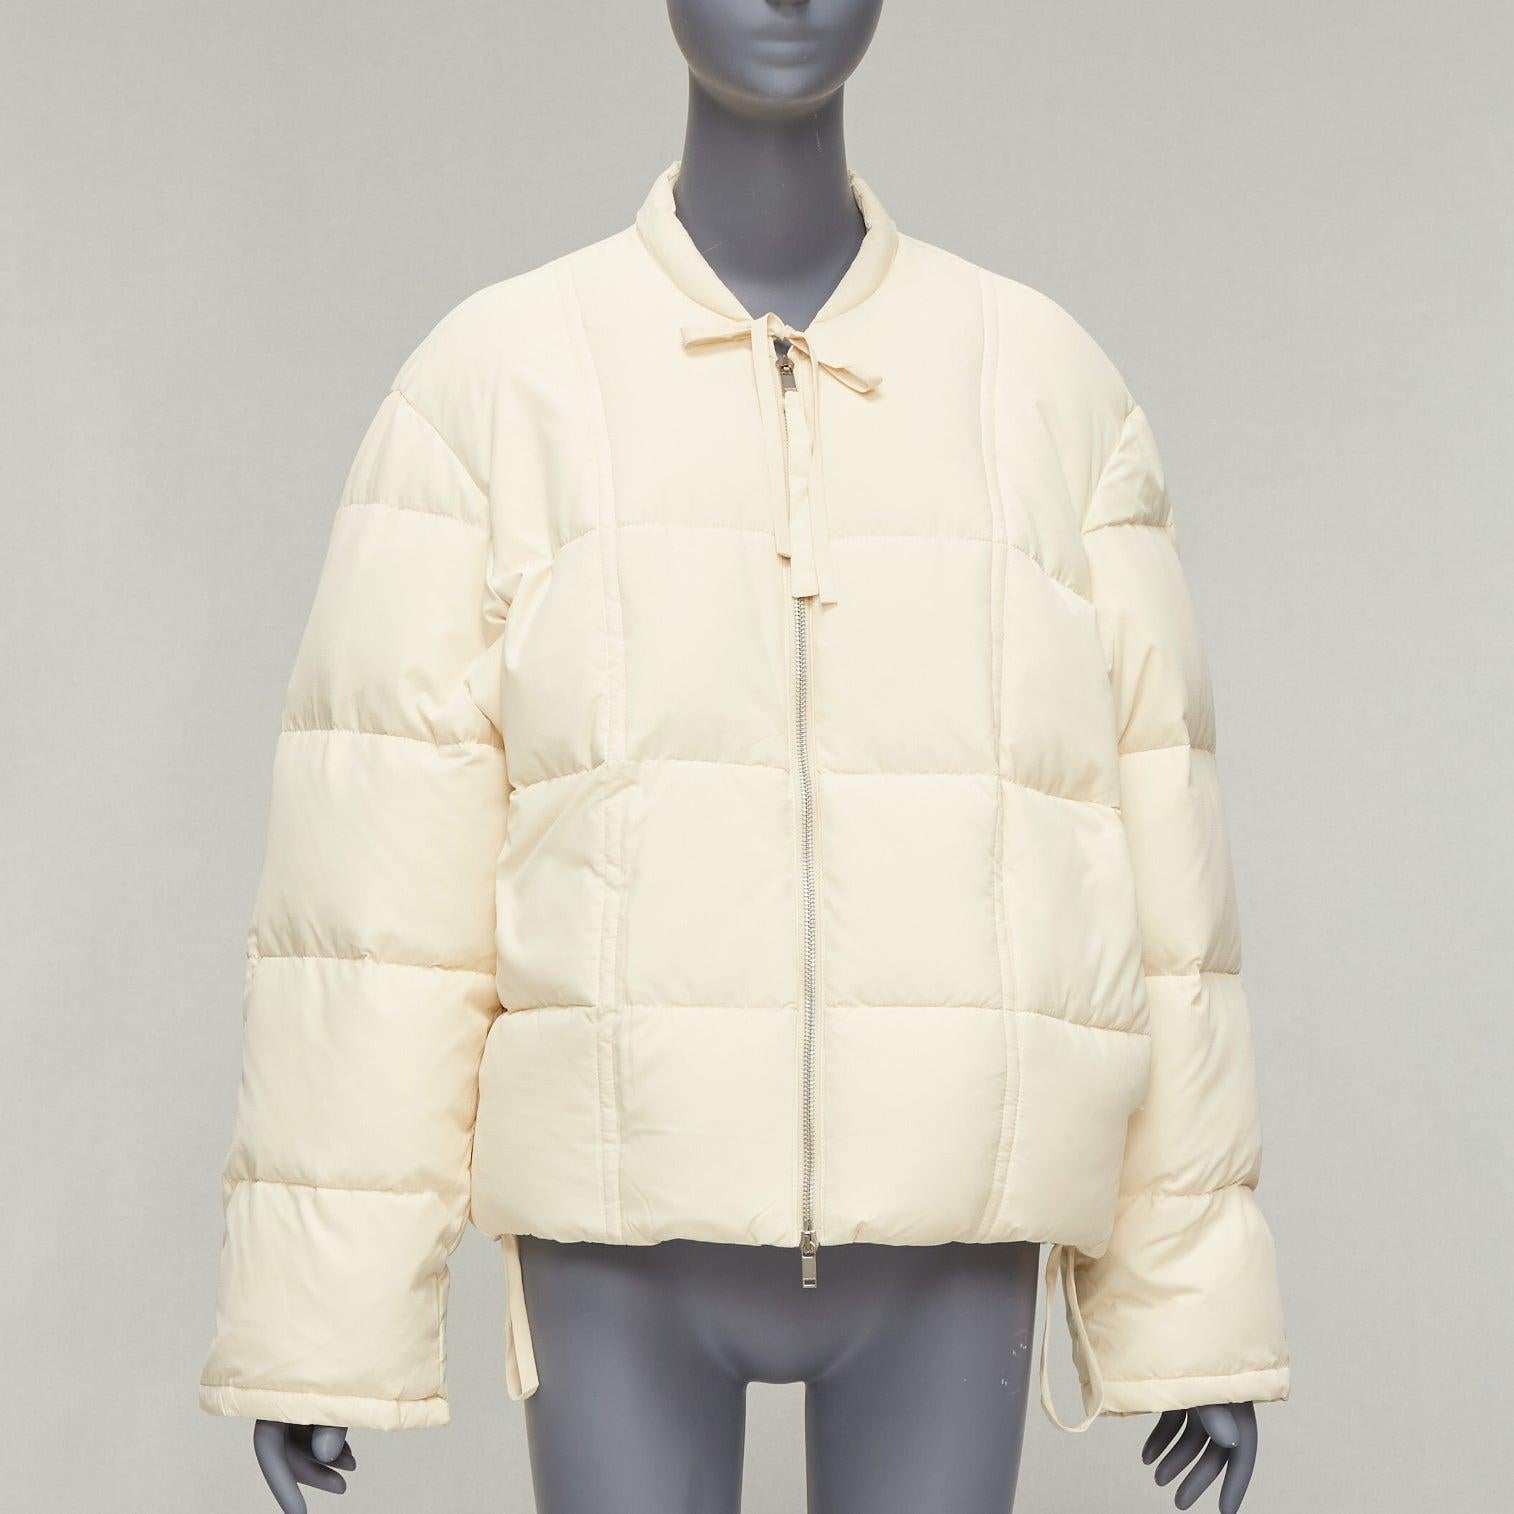 JIL SANDER + unisex cream water repellent 100% recycled cocoon puffer jacket M
Reference: TGAS/D01002
Brand: Jil Sander
Collection: Jil Sander +
Material: Polyester
Color: Cream
Pattern: Solid
Closure: Zip
Lining: White Down
Extra Details: Water